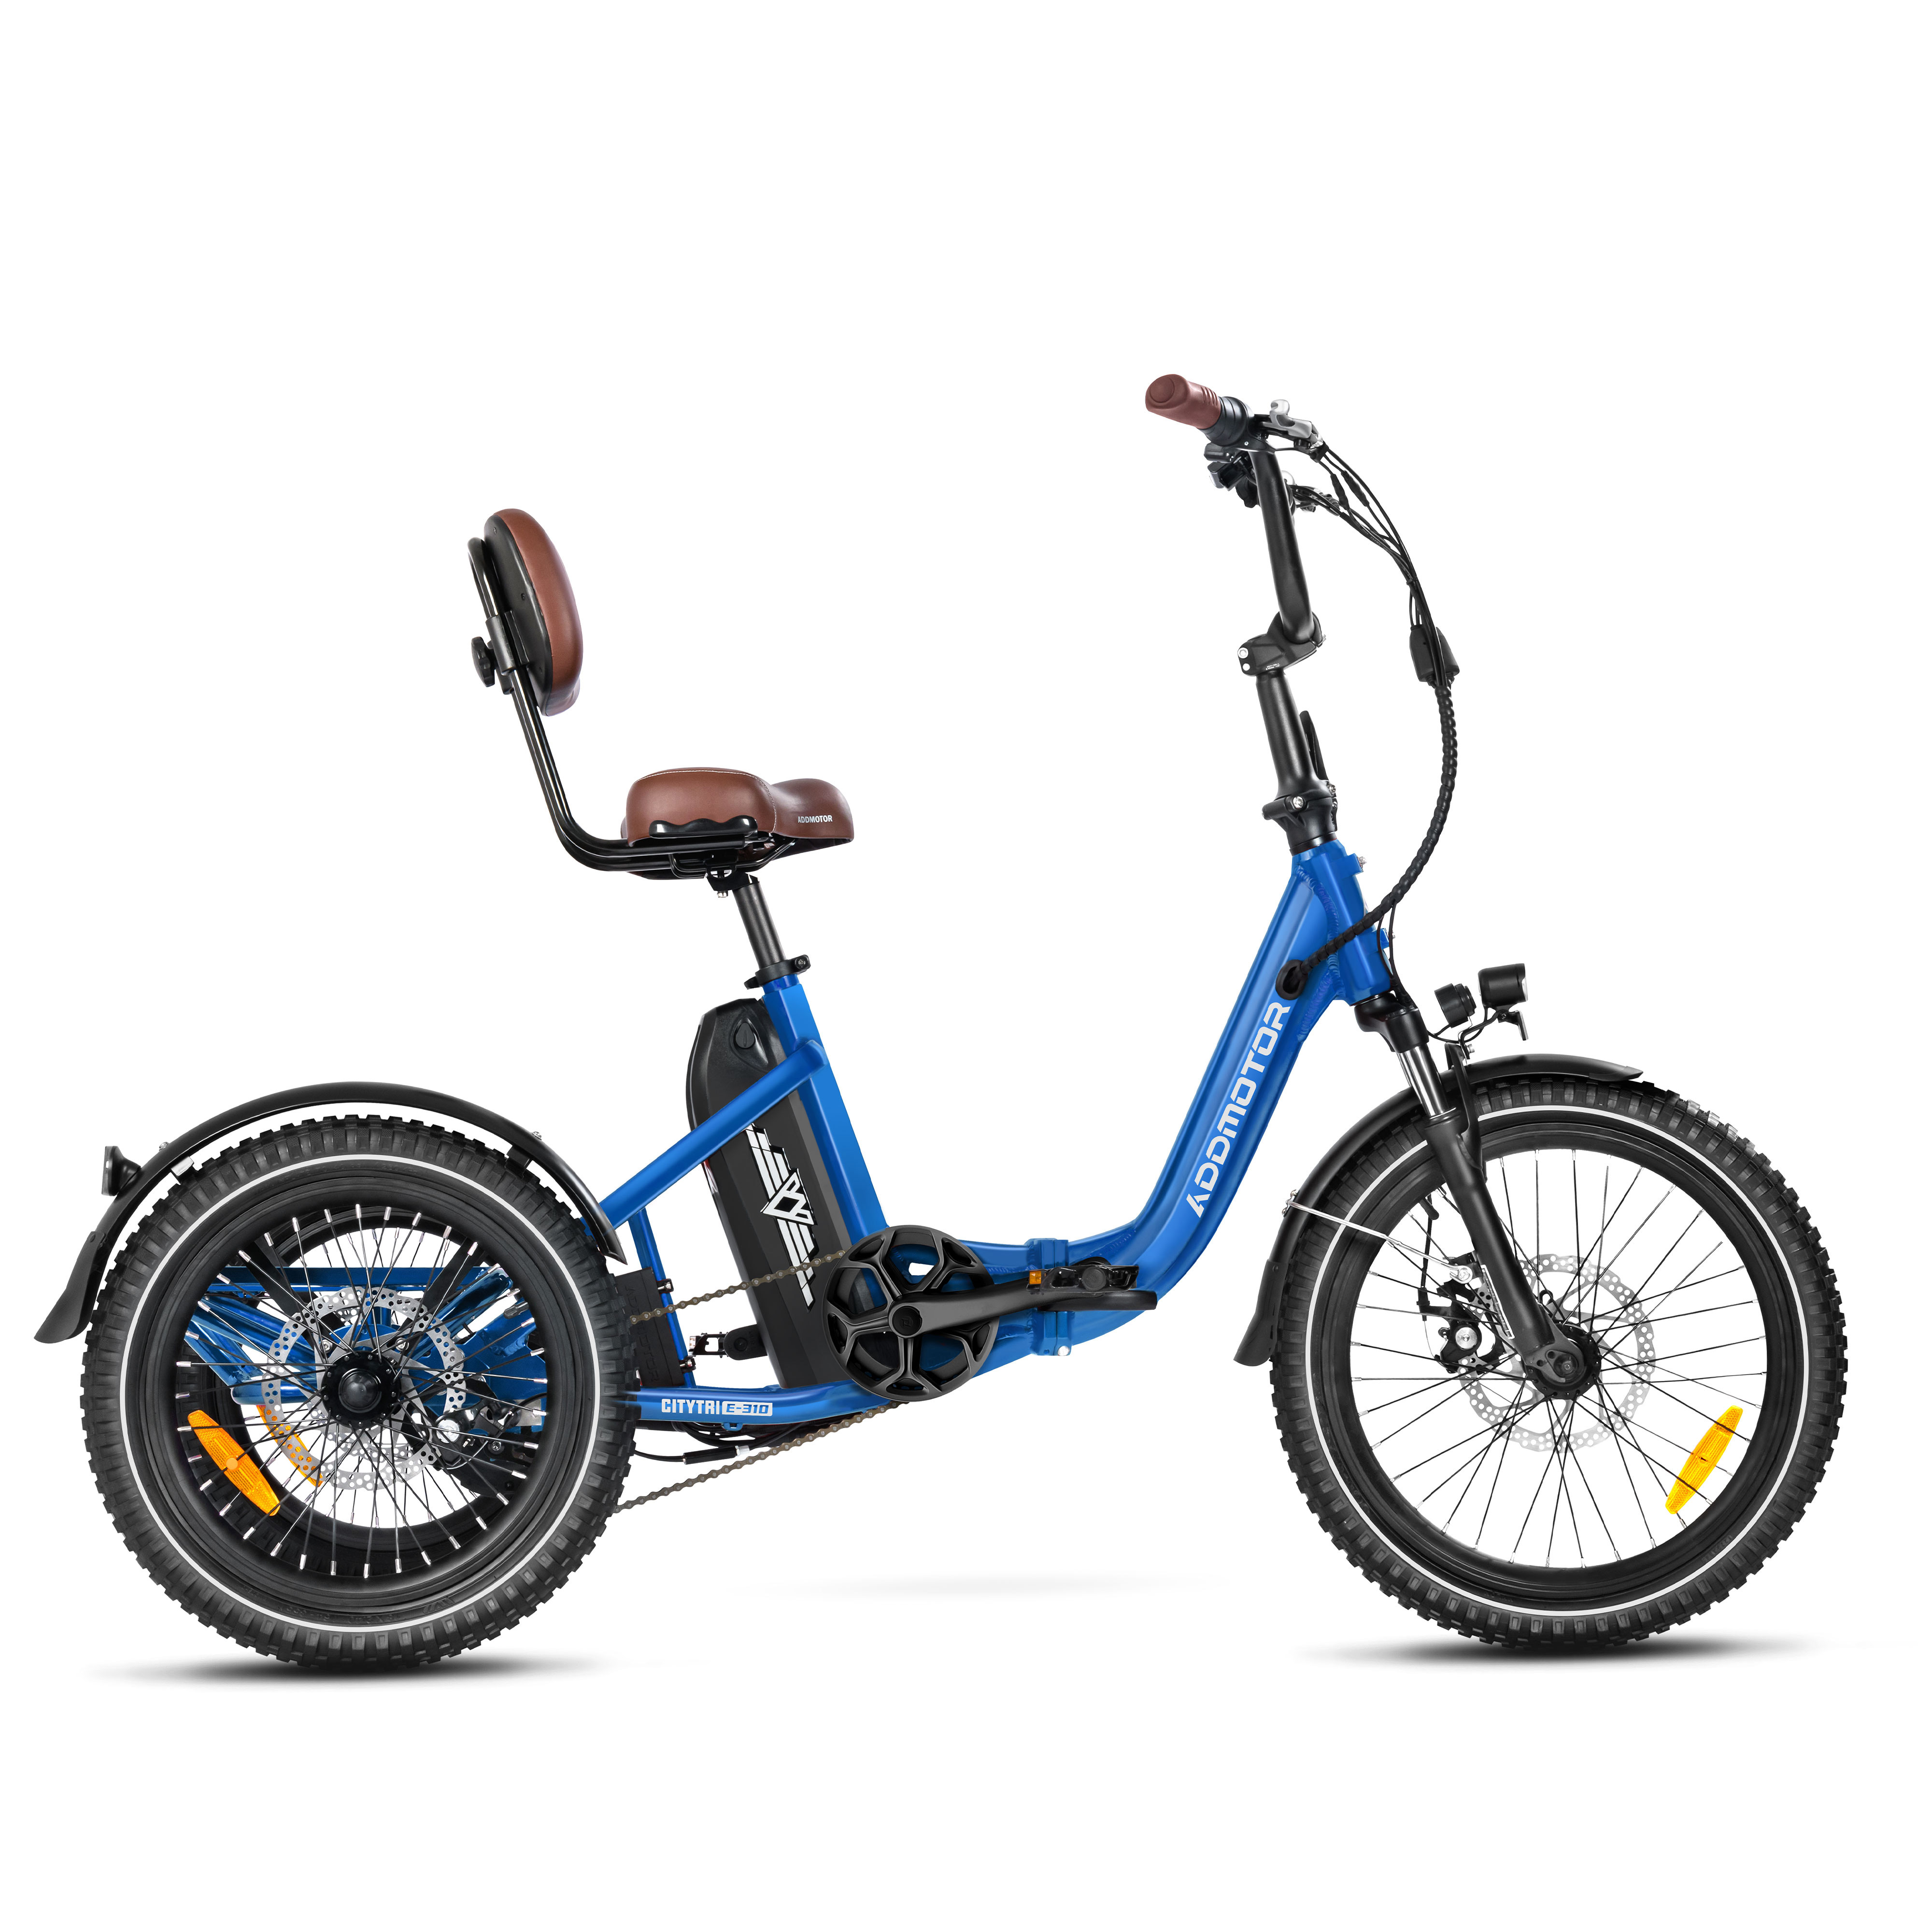 Addmotor Citytri E-310 750W Electric Trike for Adults Best Electric Tricycle Under $2000 Up To 94 Miles - Candy Red